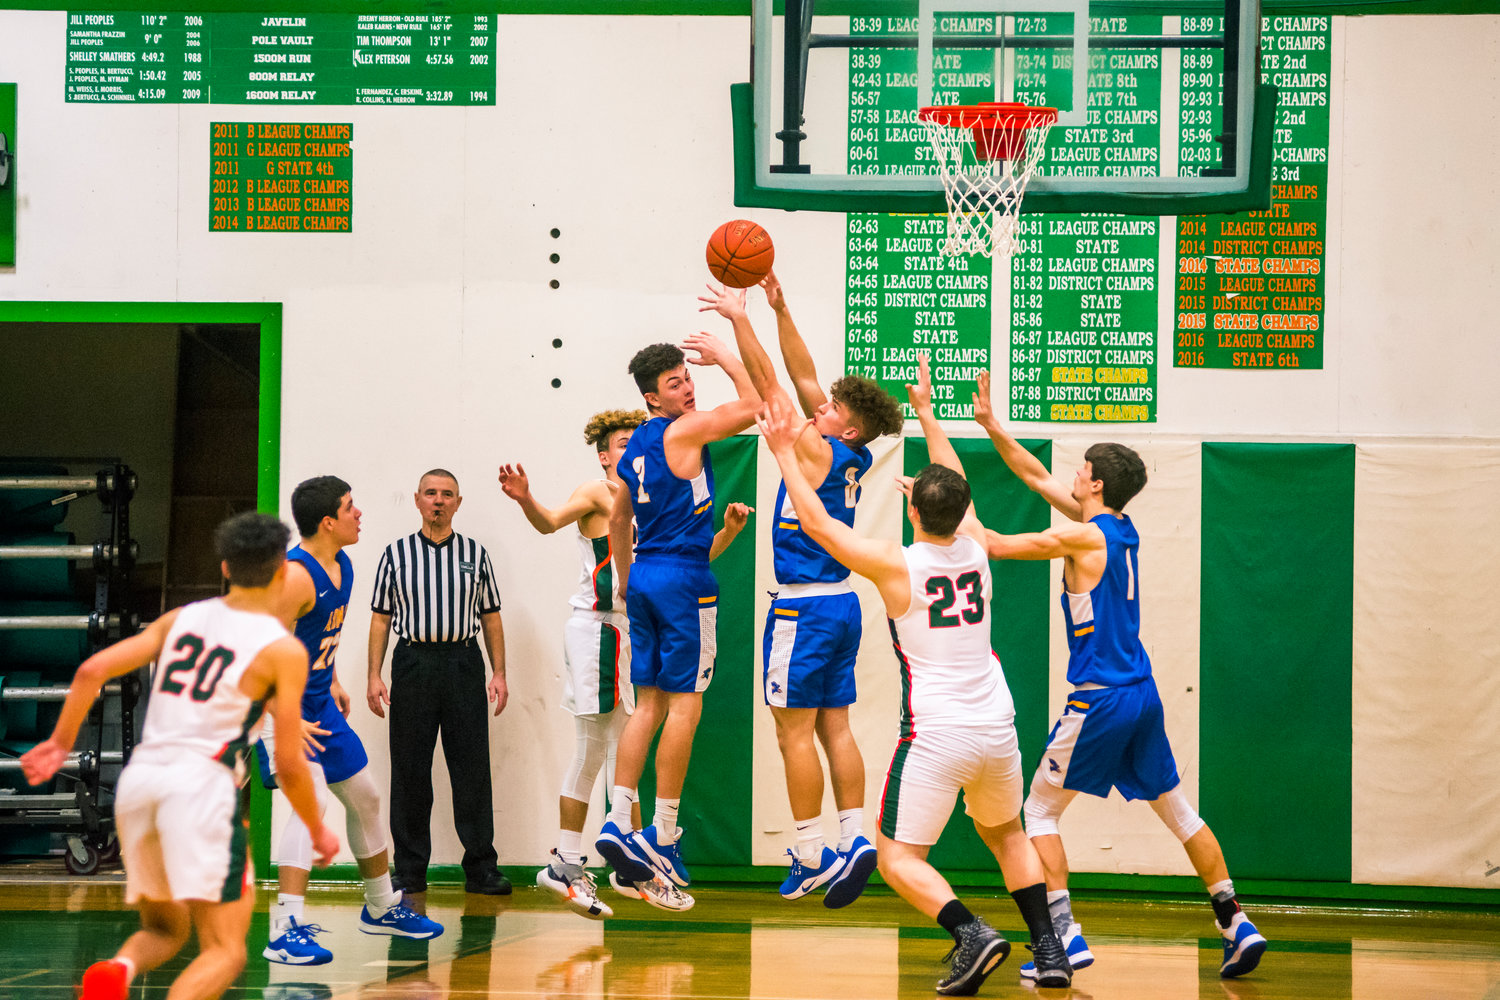 Images from a Central 2B League boys basketball game between Morton White-Pass and Adna played Friday night in Morton.